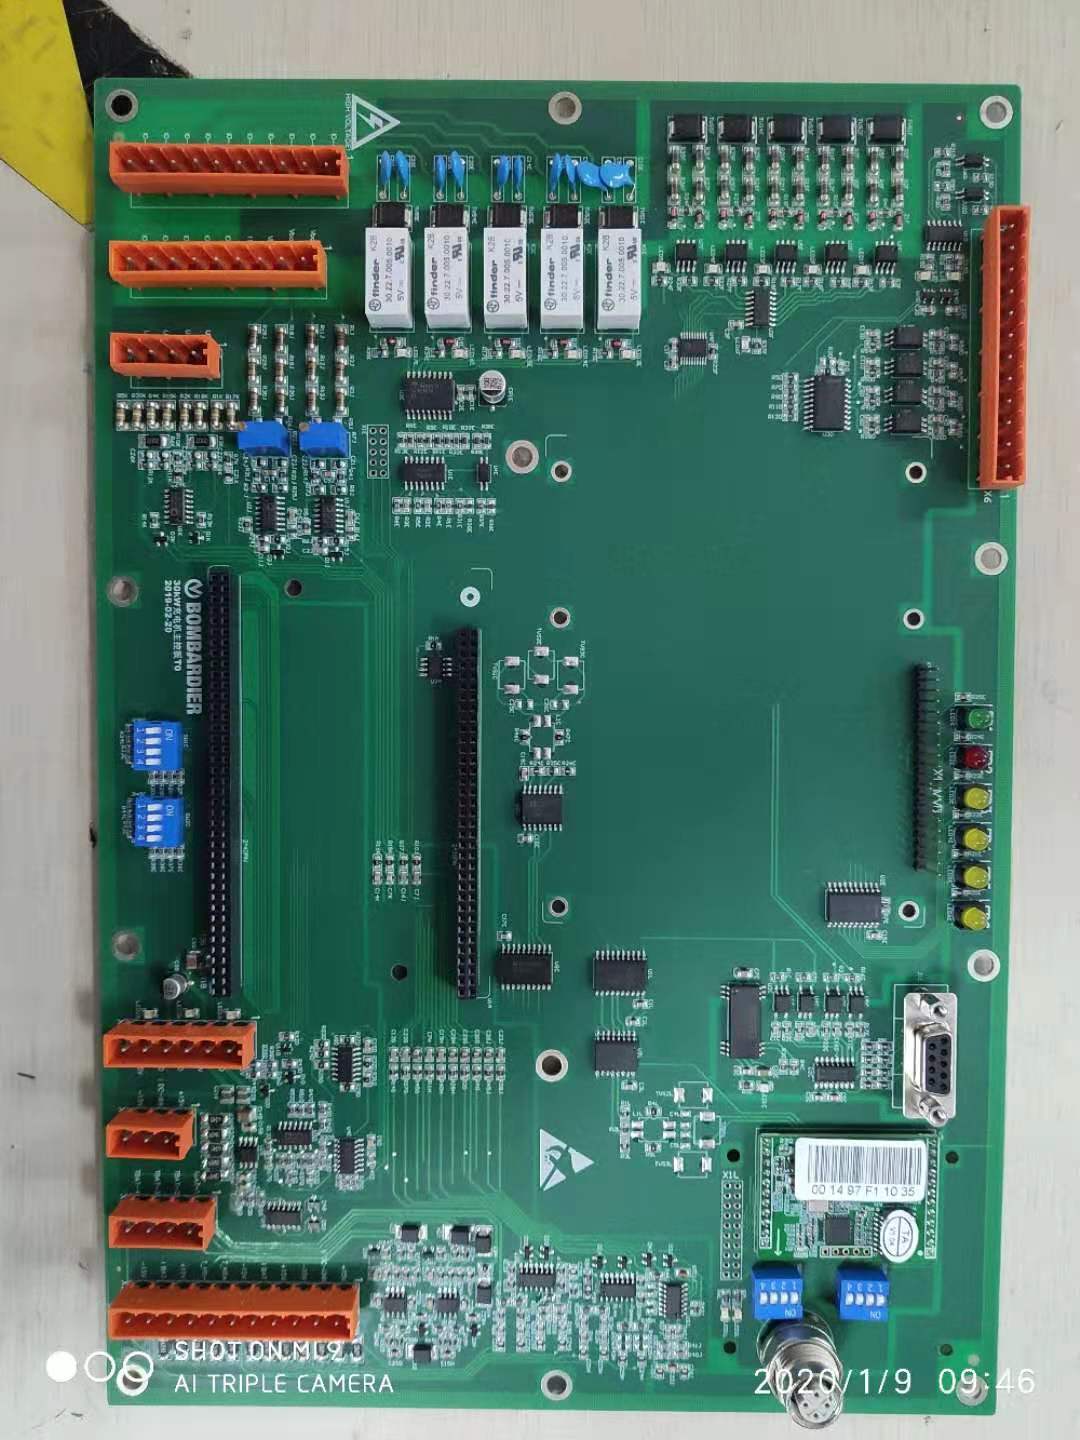 Power Board Supply for Bombardier